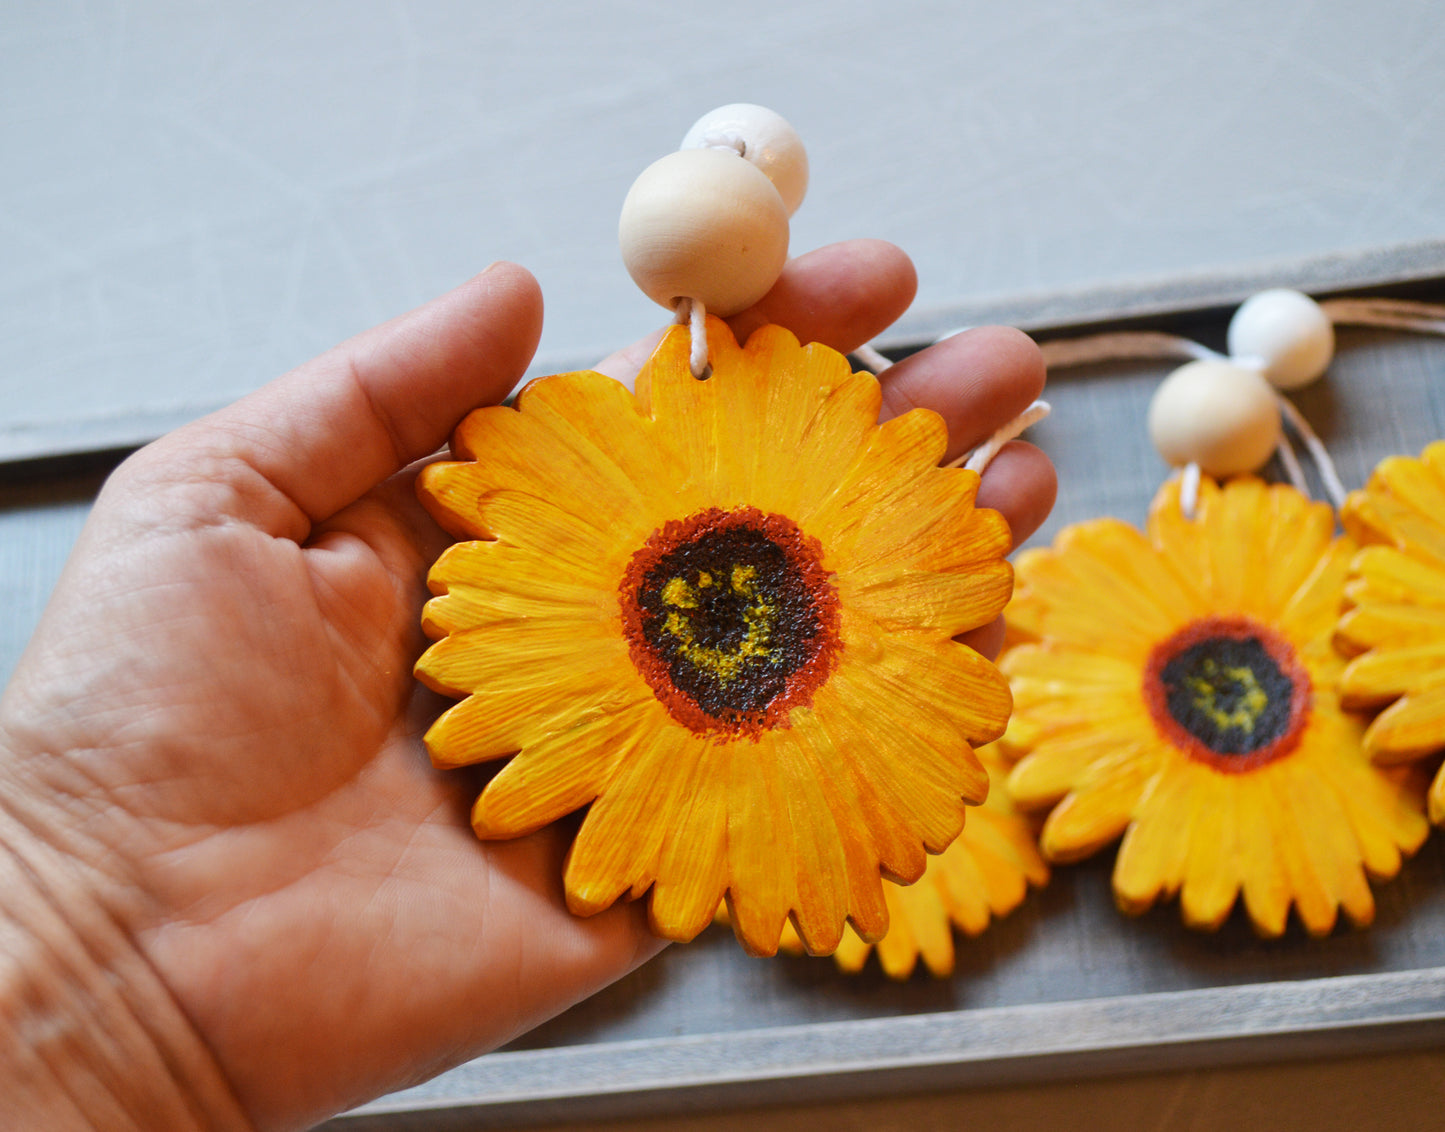 Essential oil diffuser sunflower flower car charm ornament / Make your ride smell awesome